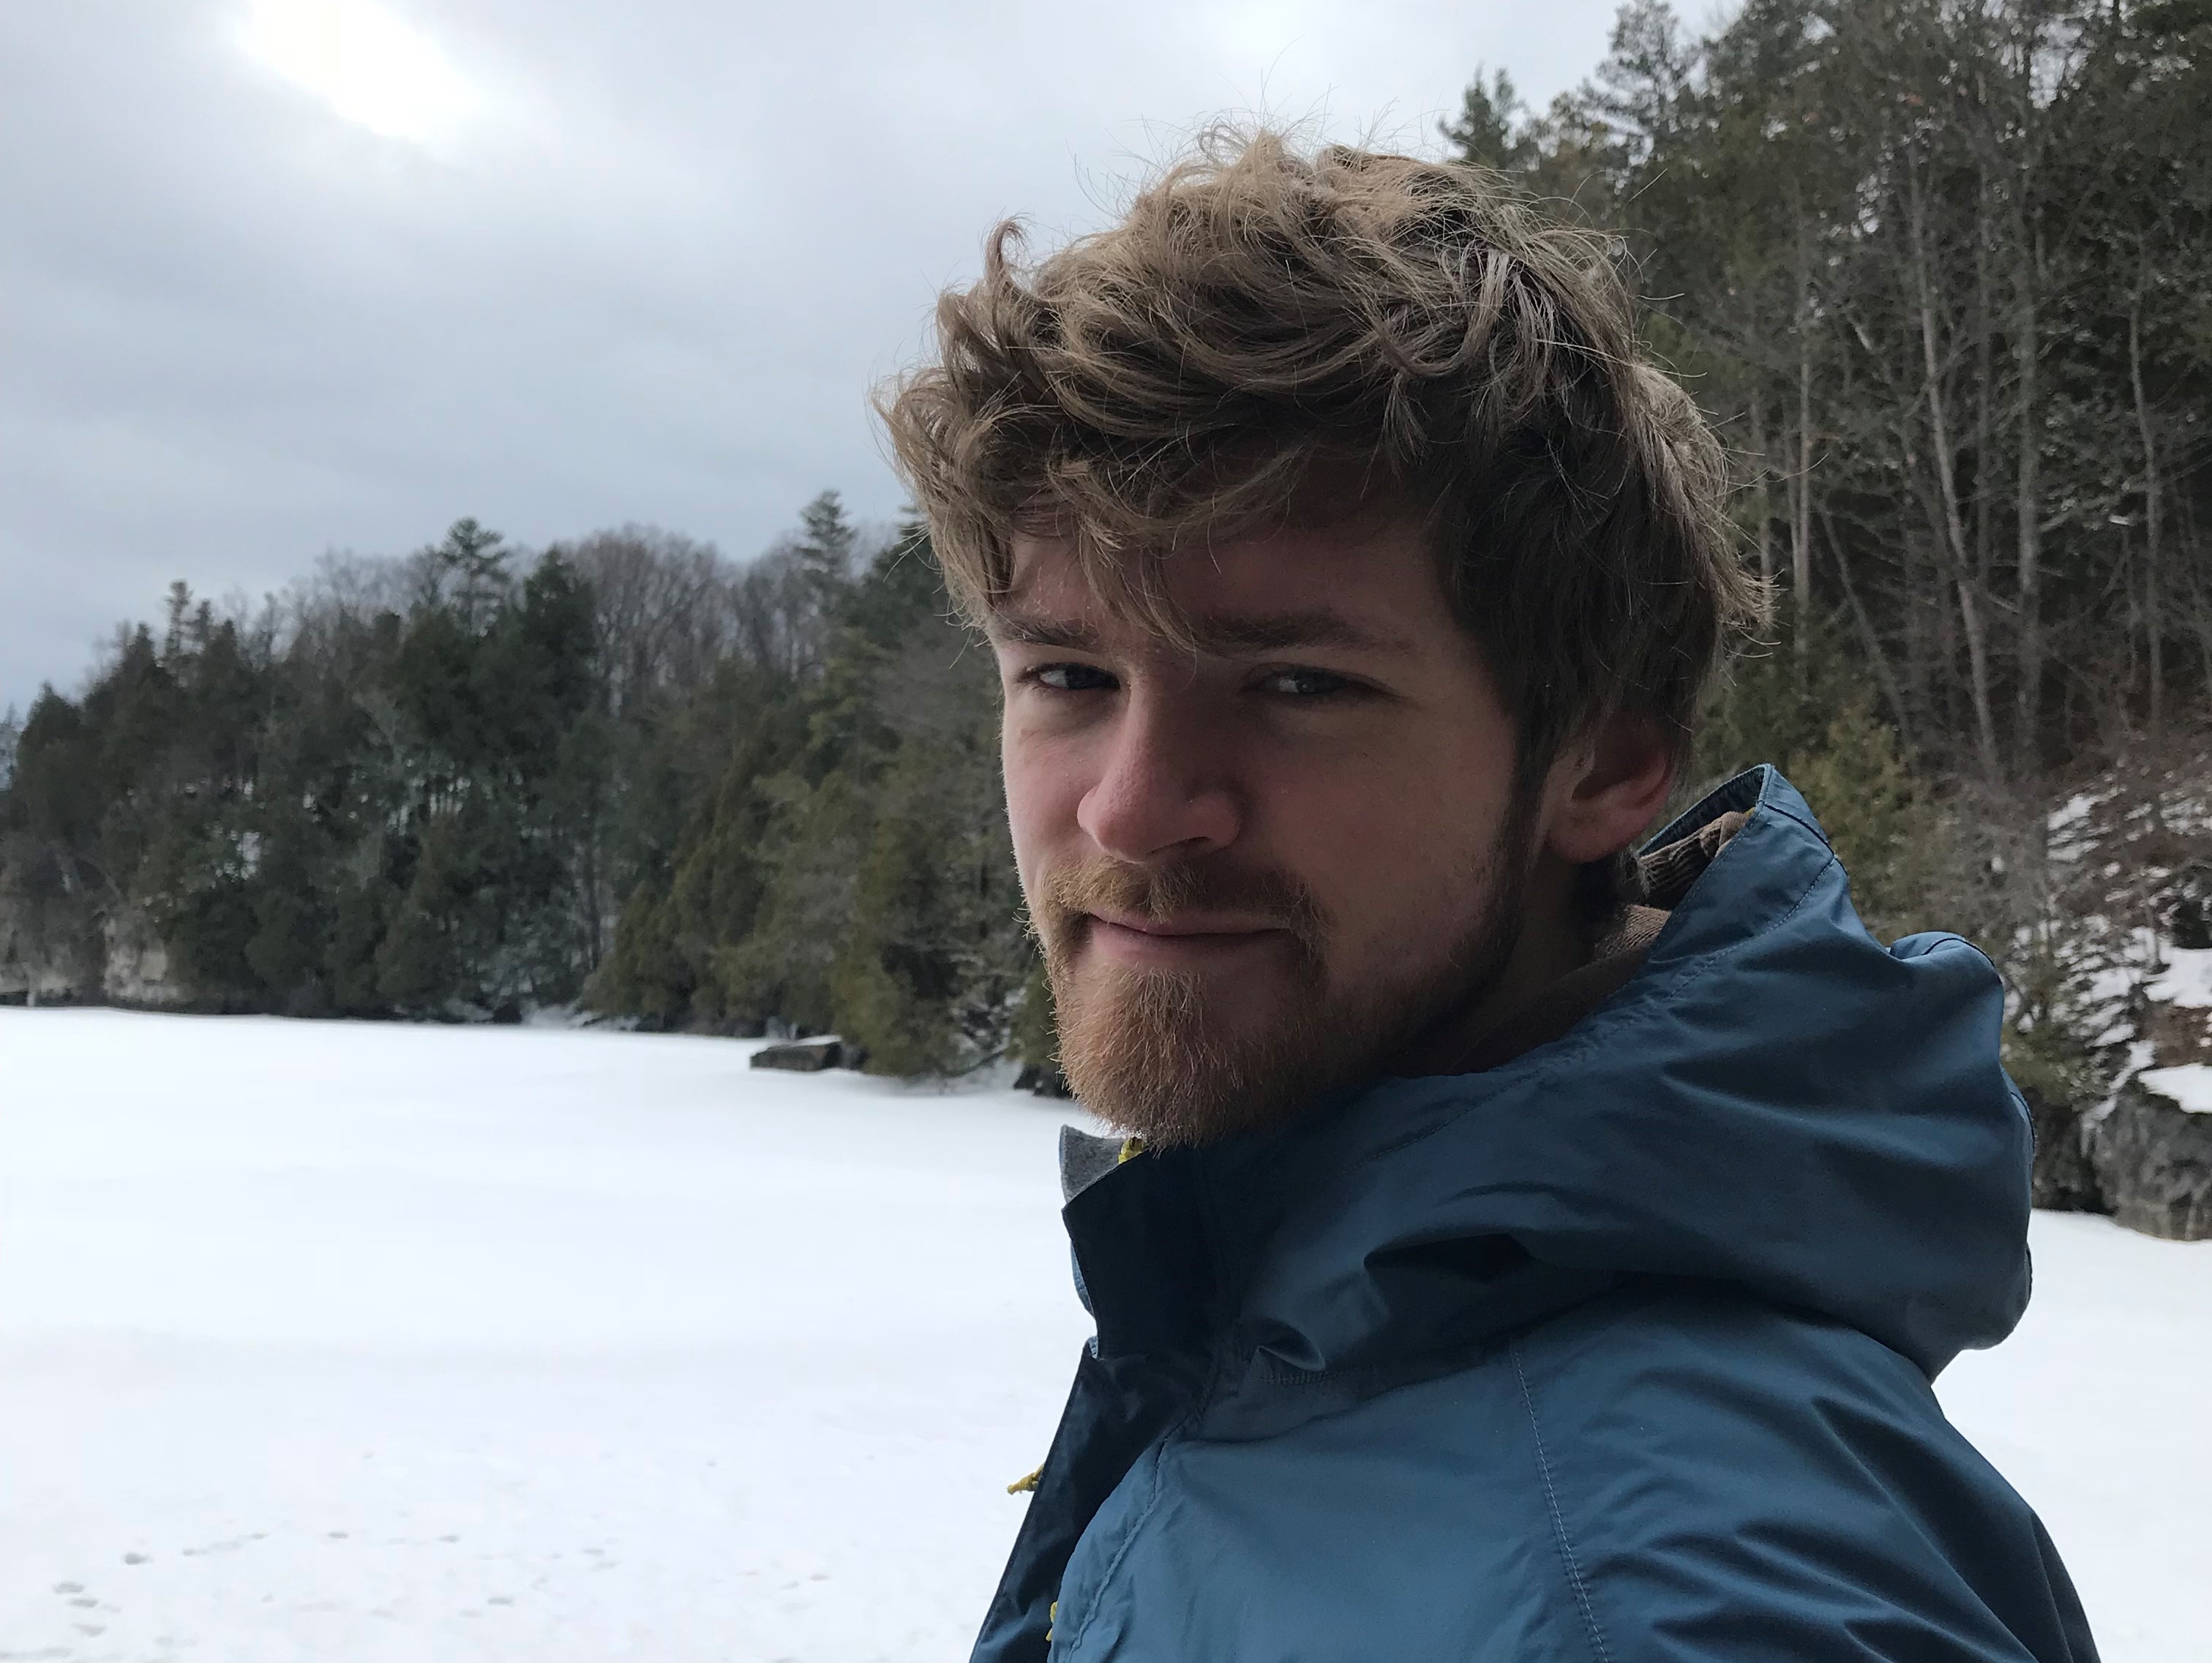 A photo of me at Malletts Bay, VT in Winter 2018